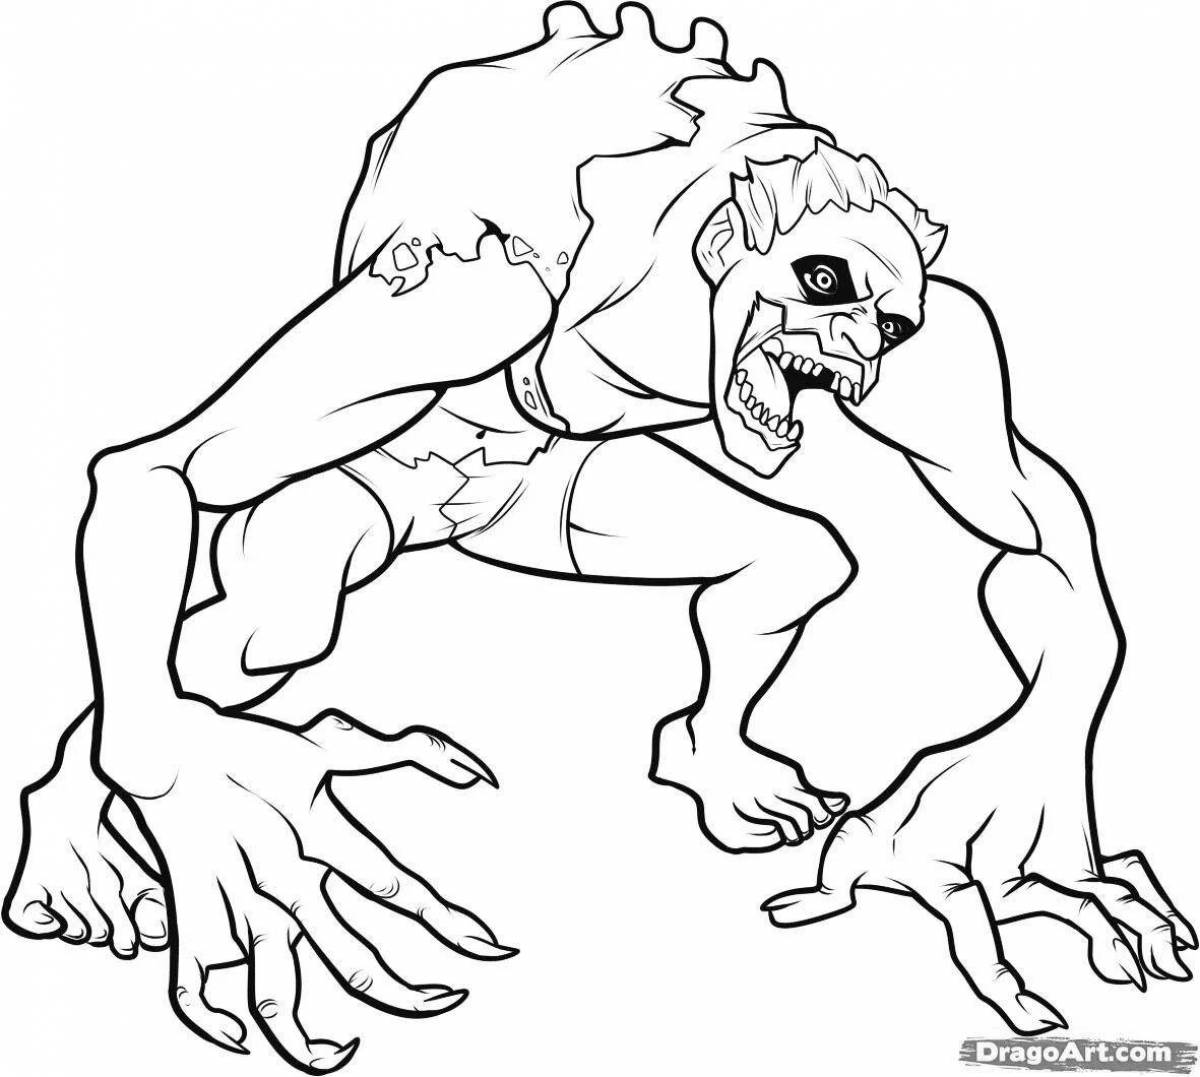 Zombie mutant sickening coloring page